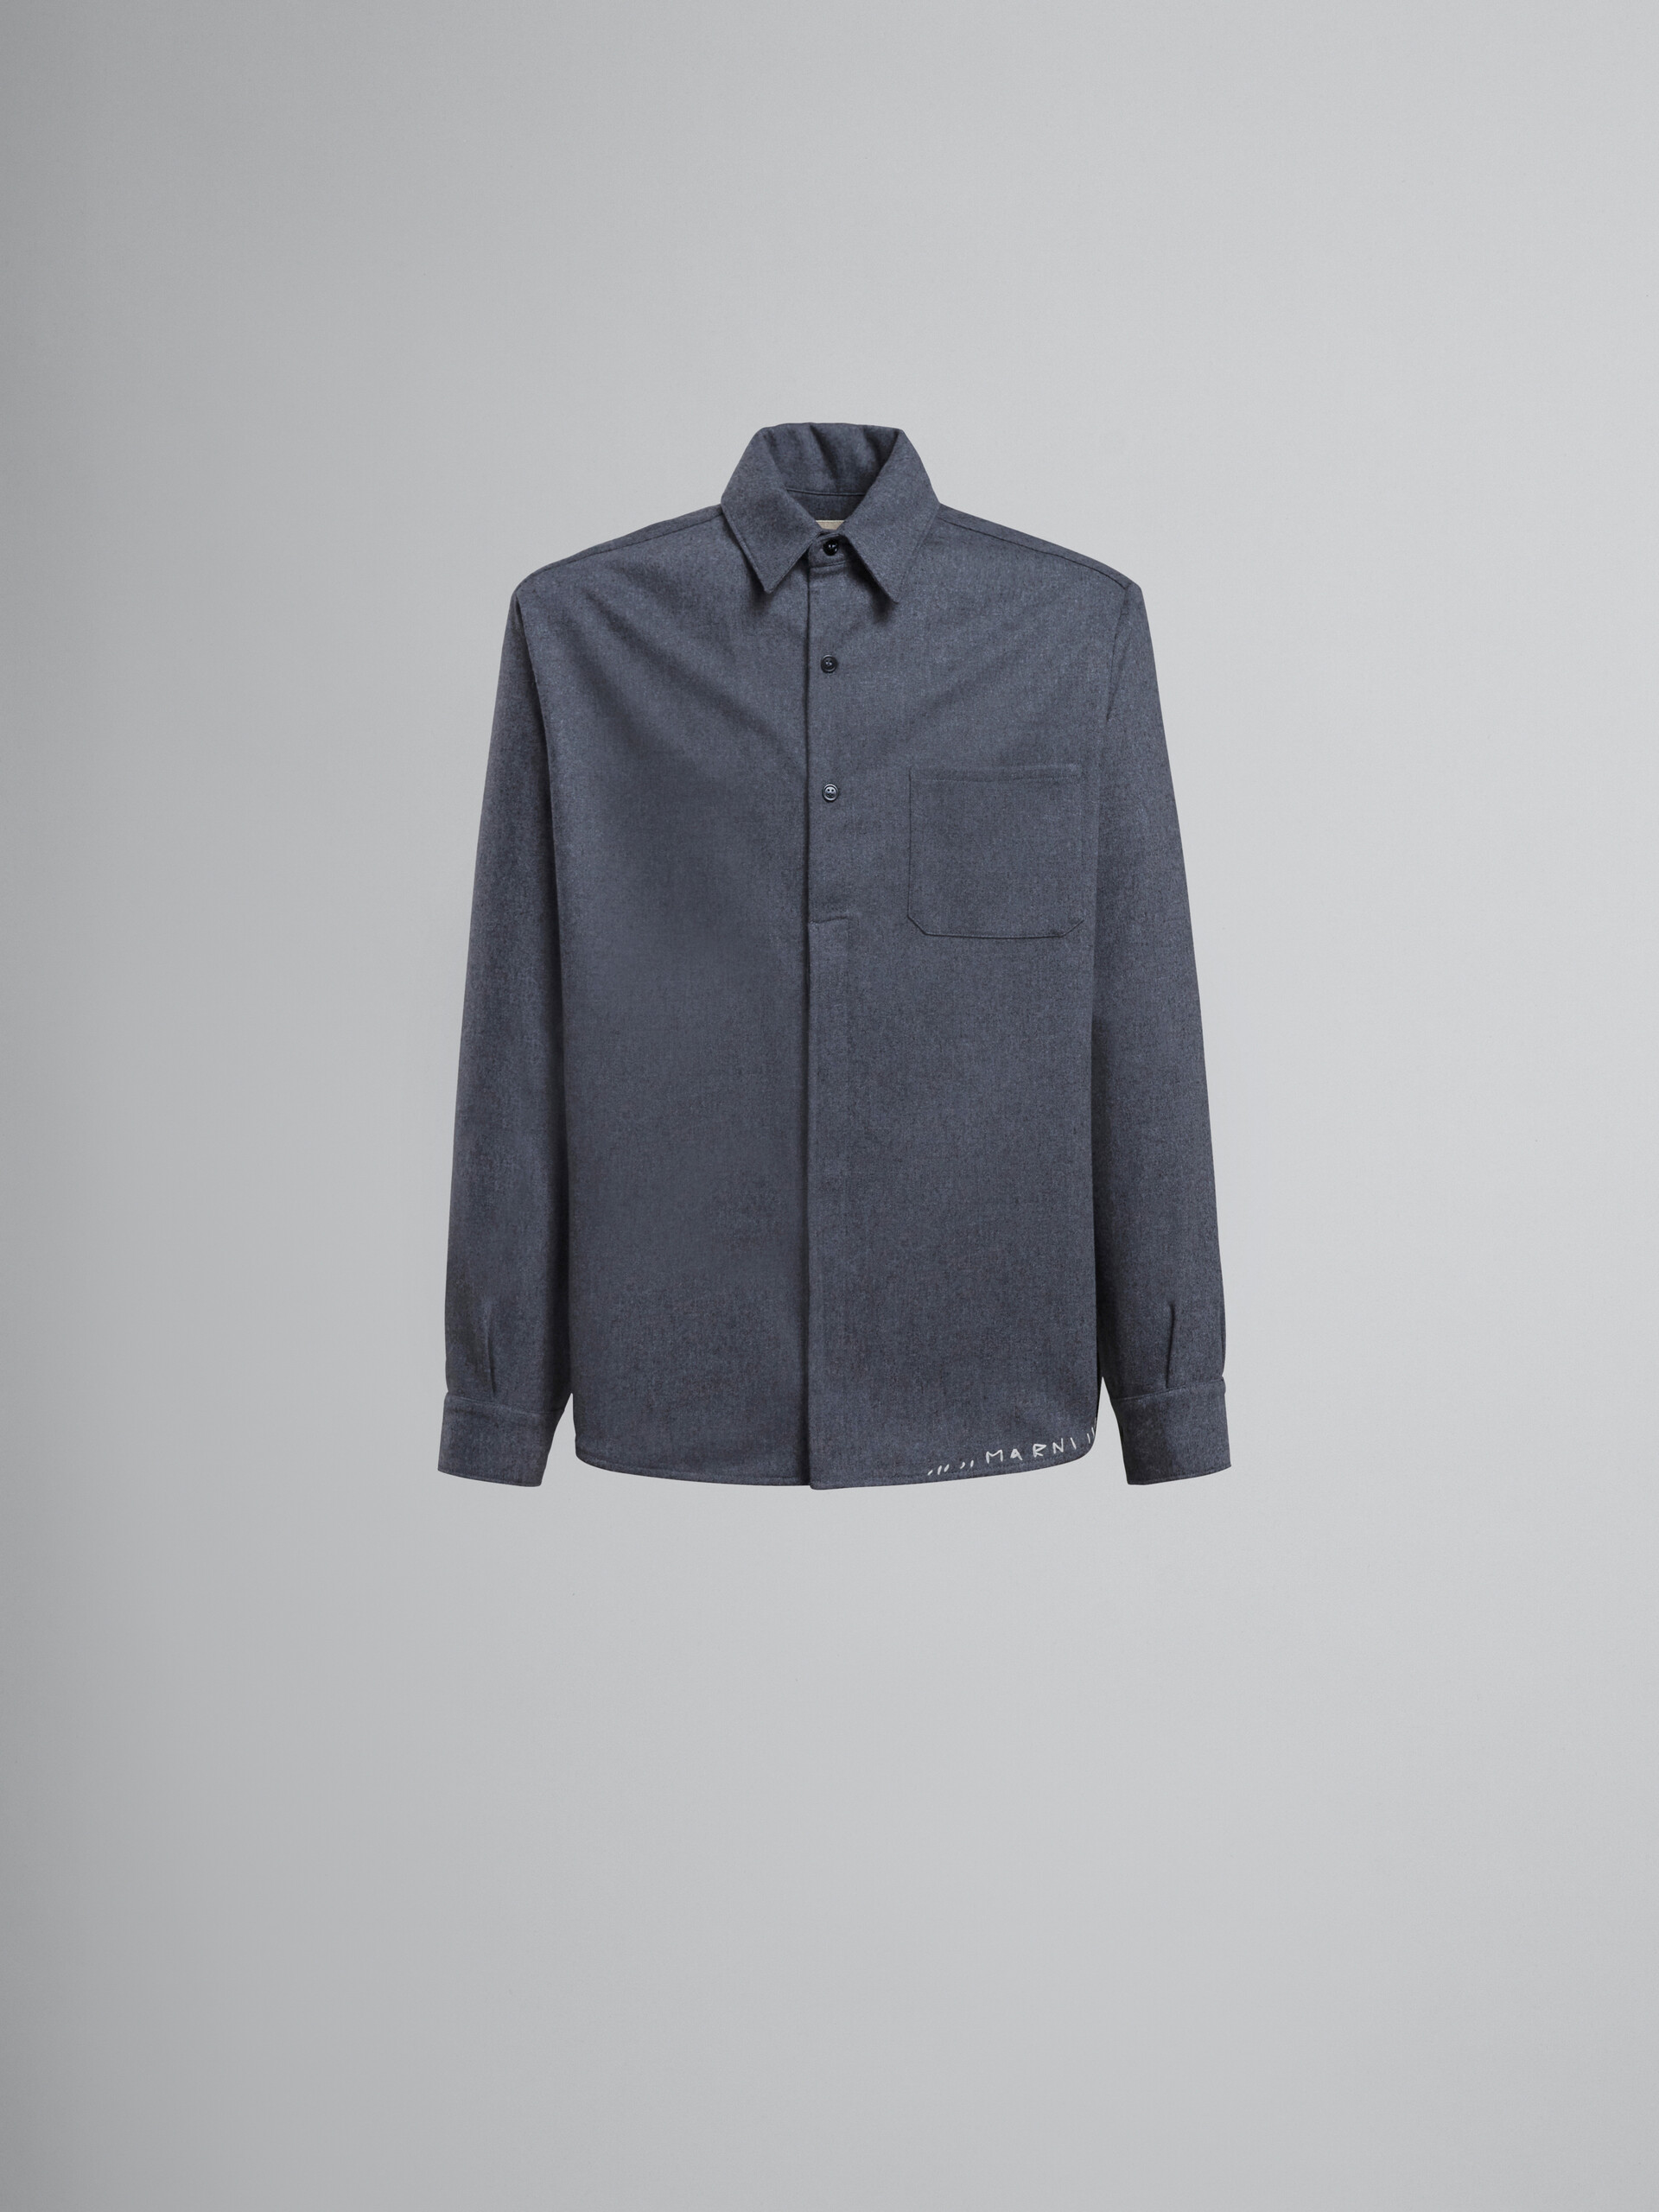 Grey relaxed-fit wool shirt - Shirts - Image 1